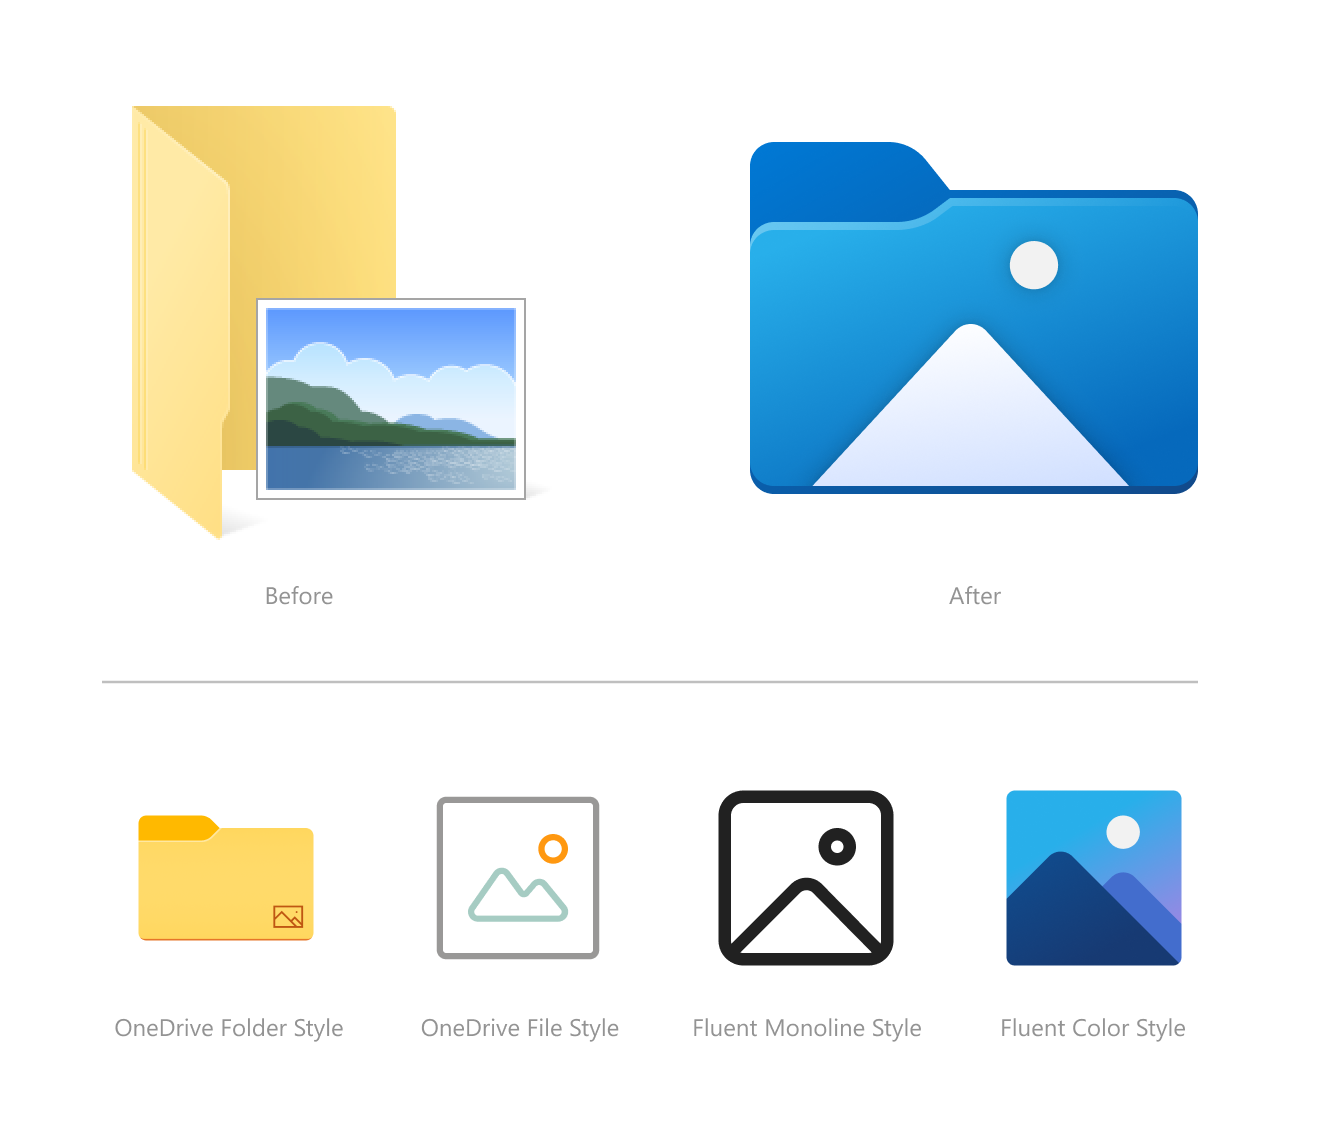 Before and after Photos icons in File Explorer.